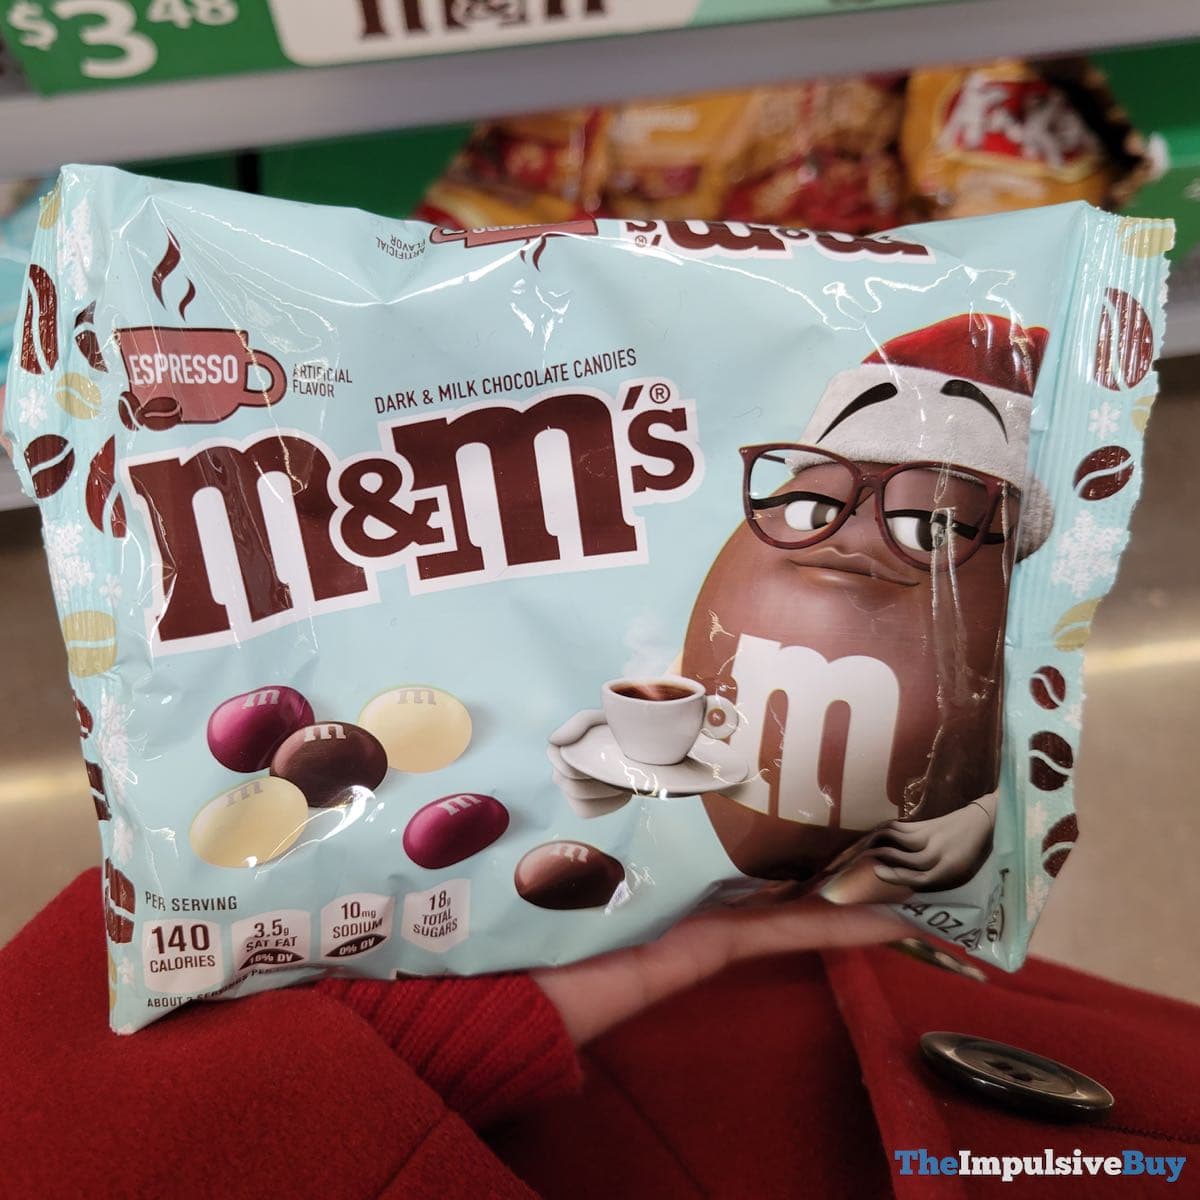 SPOTTED: Crunchy Cookie M&M's - The Impulsive Buy